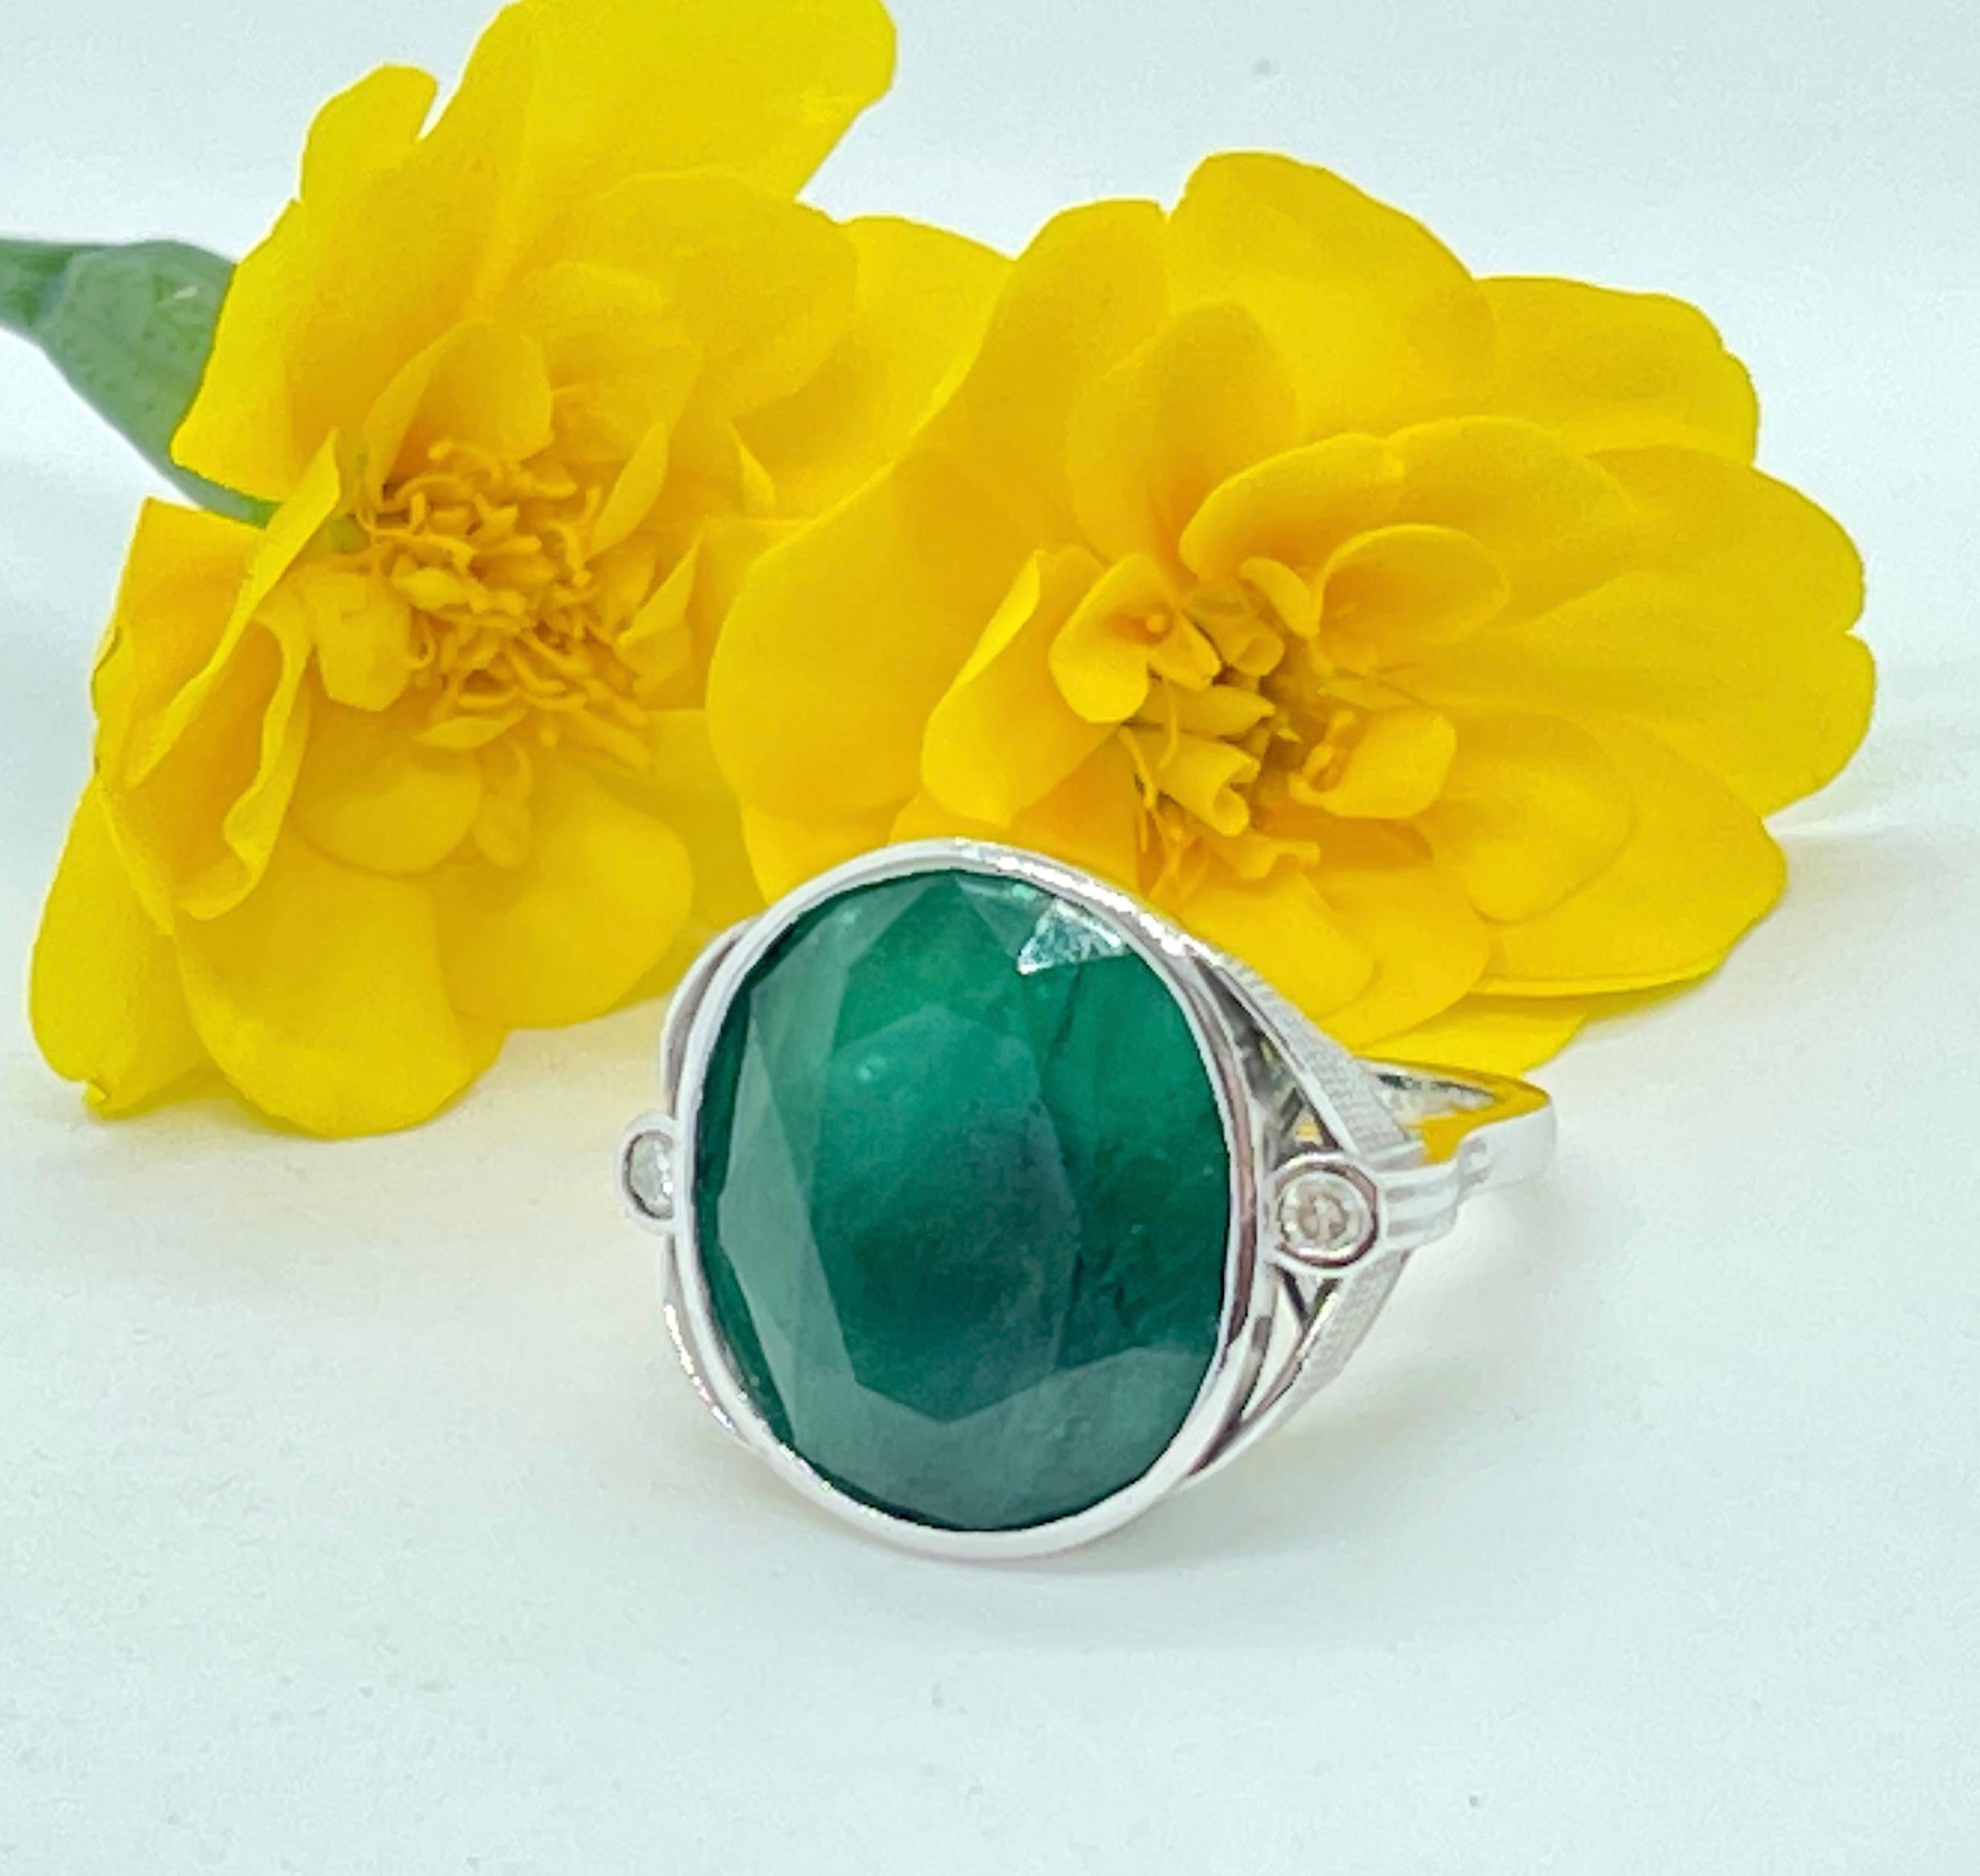 This Magnificent Ring features a HUGE Natural Emerald with Diamonds on the side.

The Emerald is medium-strong green and weighs approximately 20.82 carats  It has been classified as ‘medium dark’ because the stone has inclusions which make it